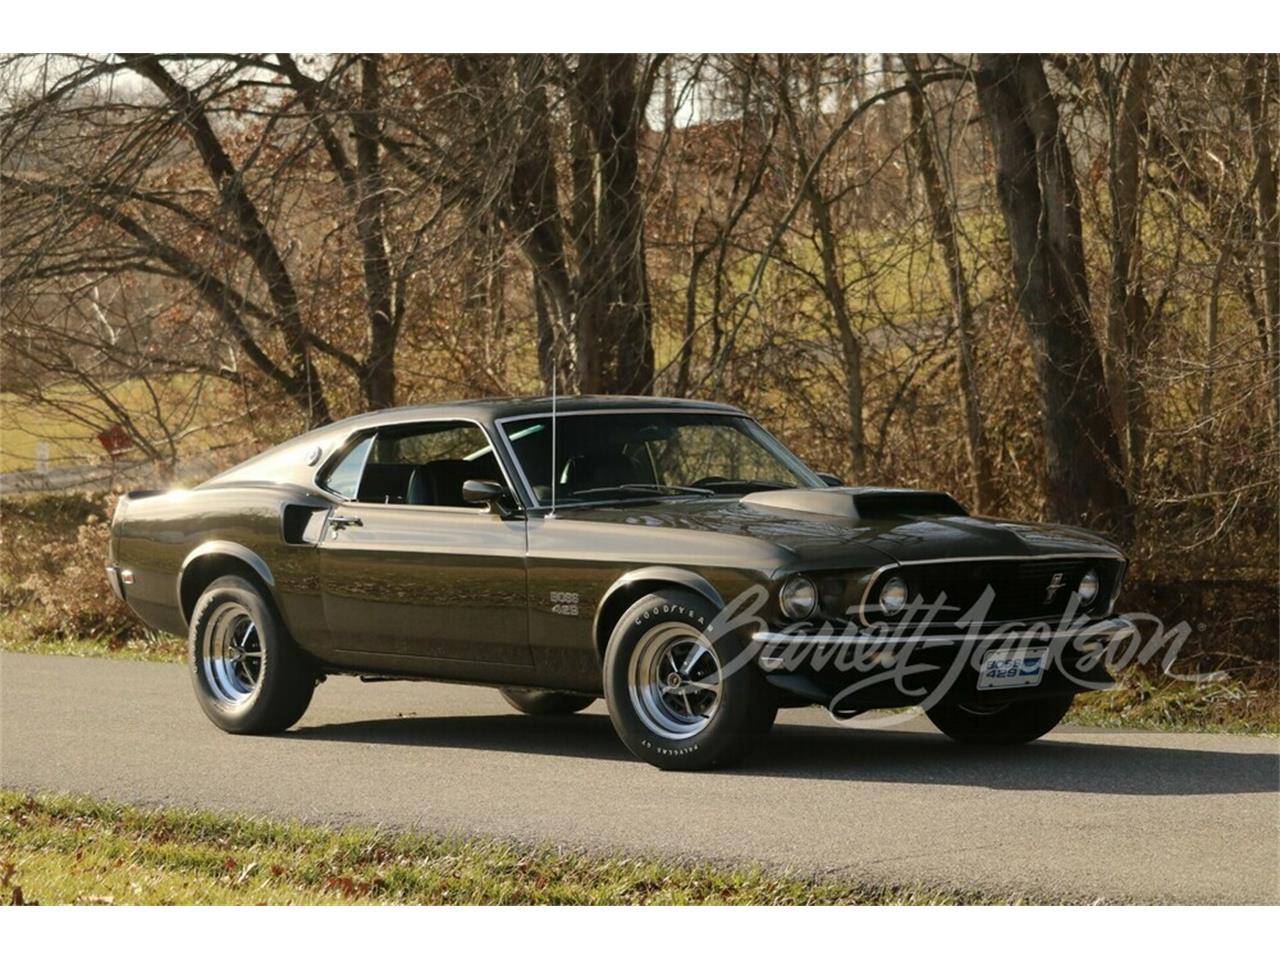 For Sale at Auction: 1969 Ford Mustang in Scottsdale, Arizona for sale in Scottsdale, AZ